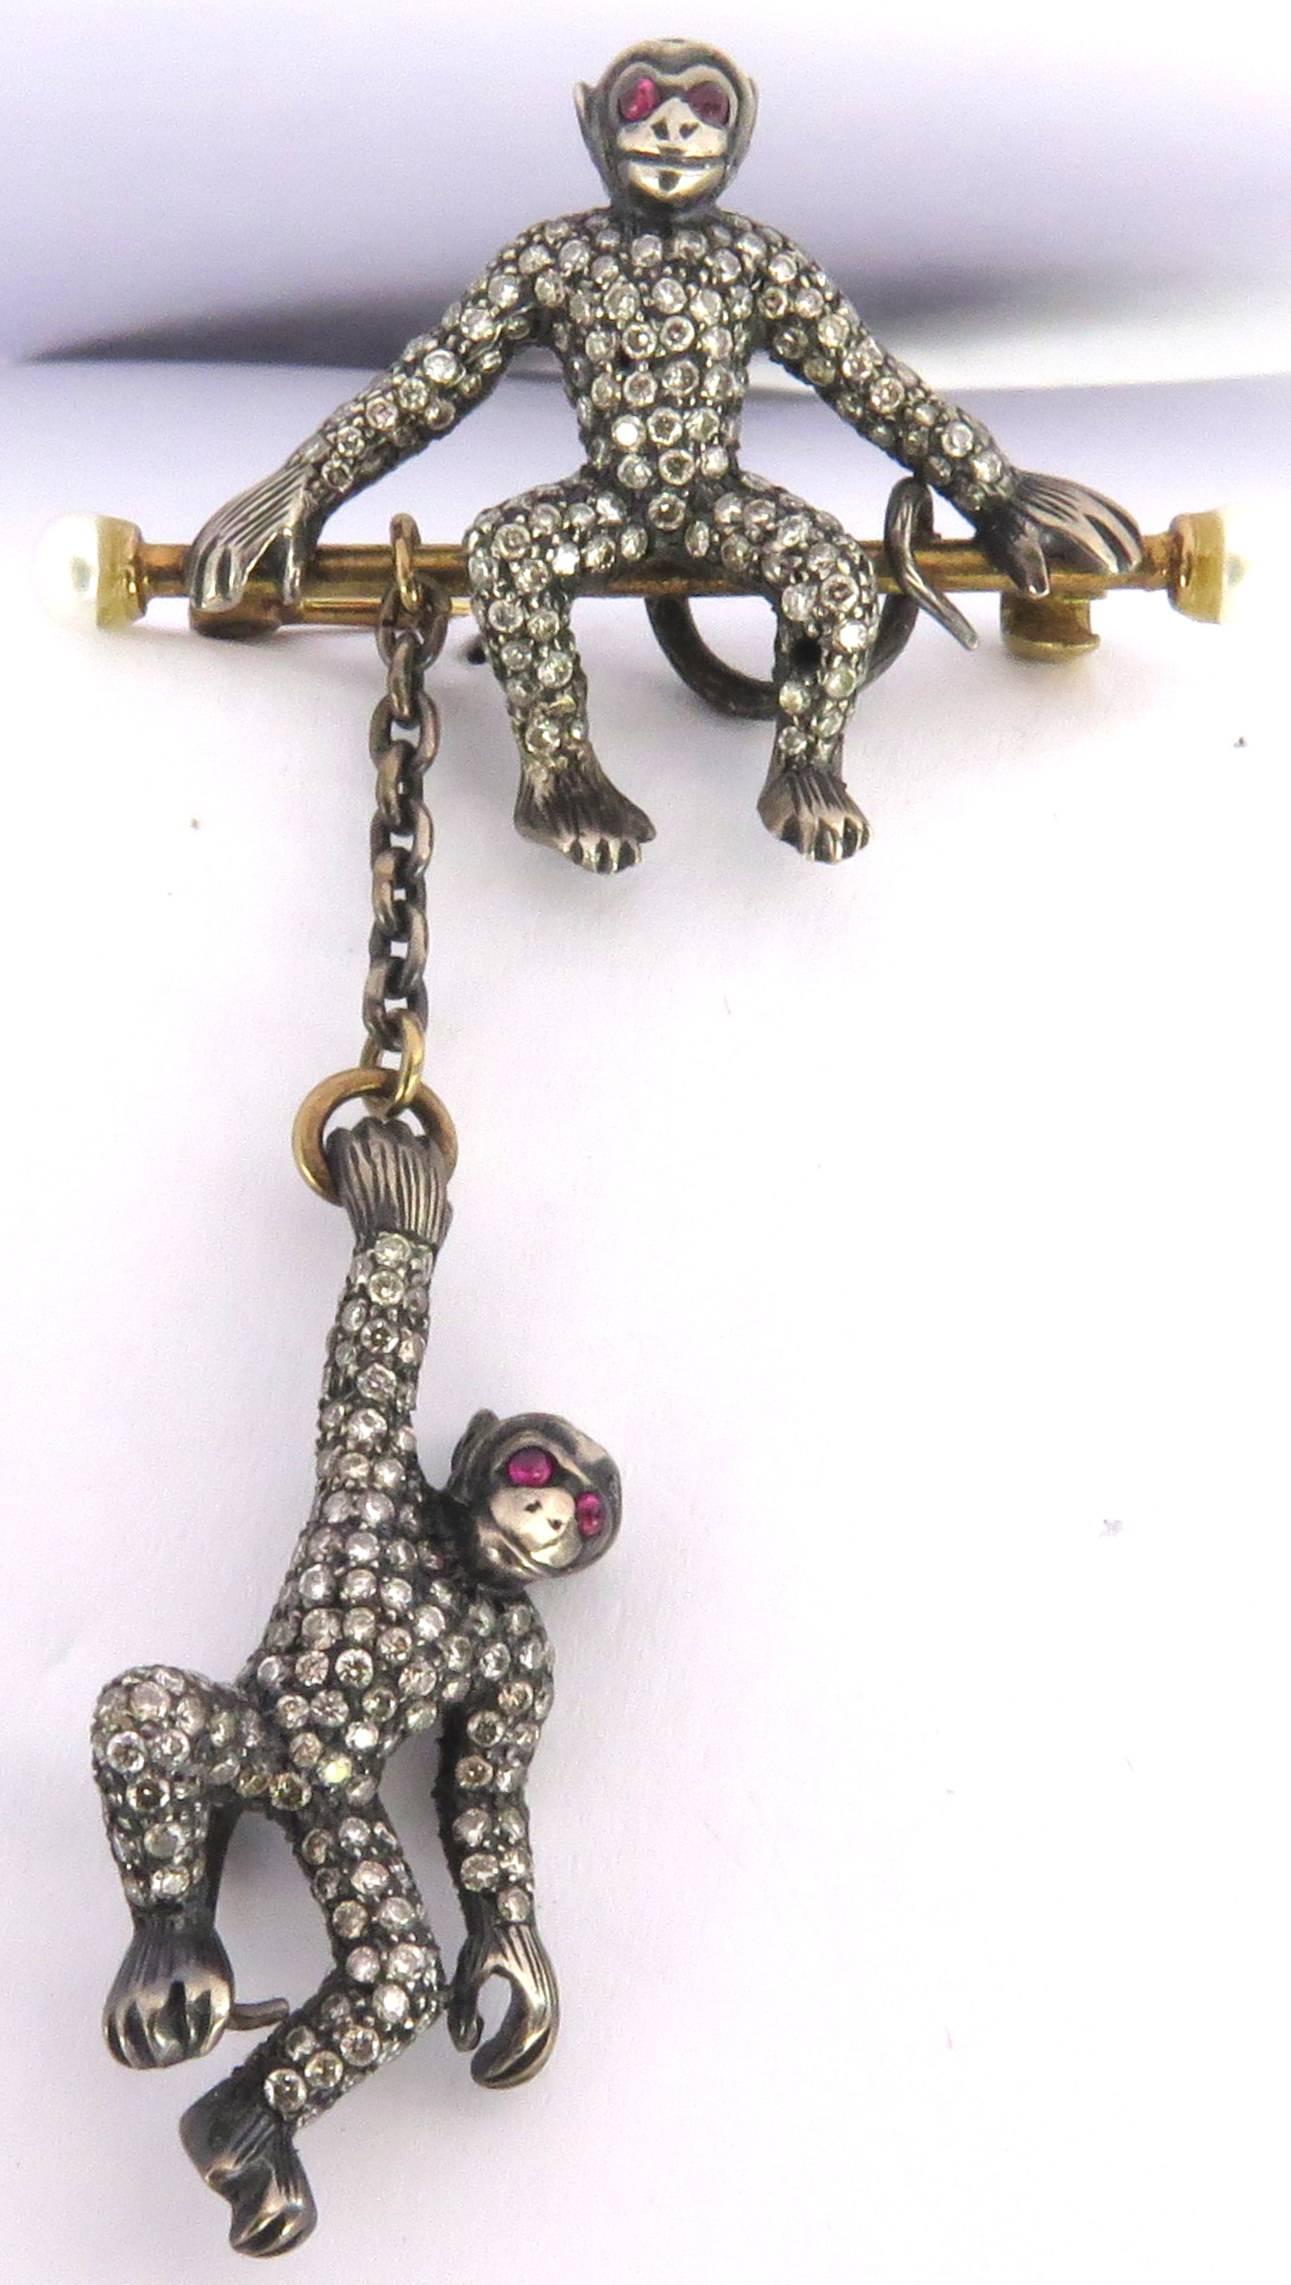 This adorable pair of monkeys are so much fun to wear. The detail on their faces are just irresistible! The monkey on top sits upon a gold bar capped with a pearl on each end. The monkey on the bottom swings  from the bar below. Each monkey has